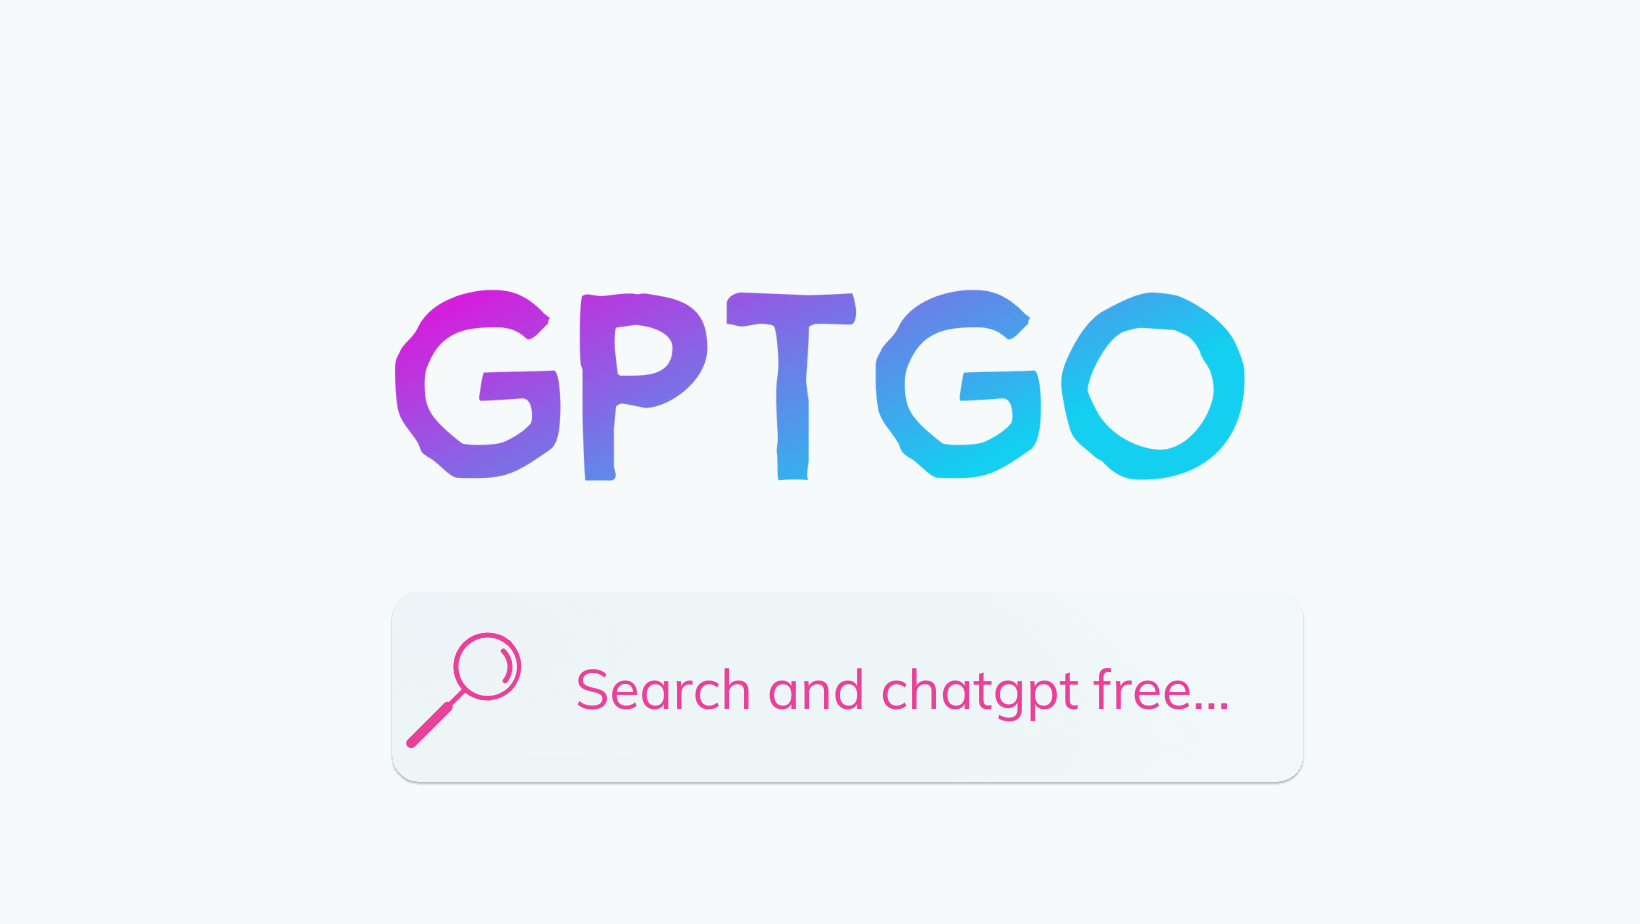 gptgo-enhance-your-chatgpt-experience-with-instant-and-comprehensive-search-capabilities